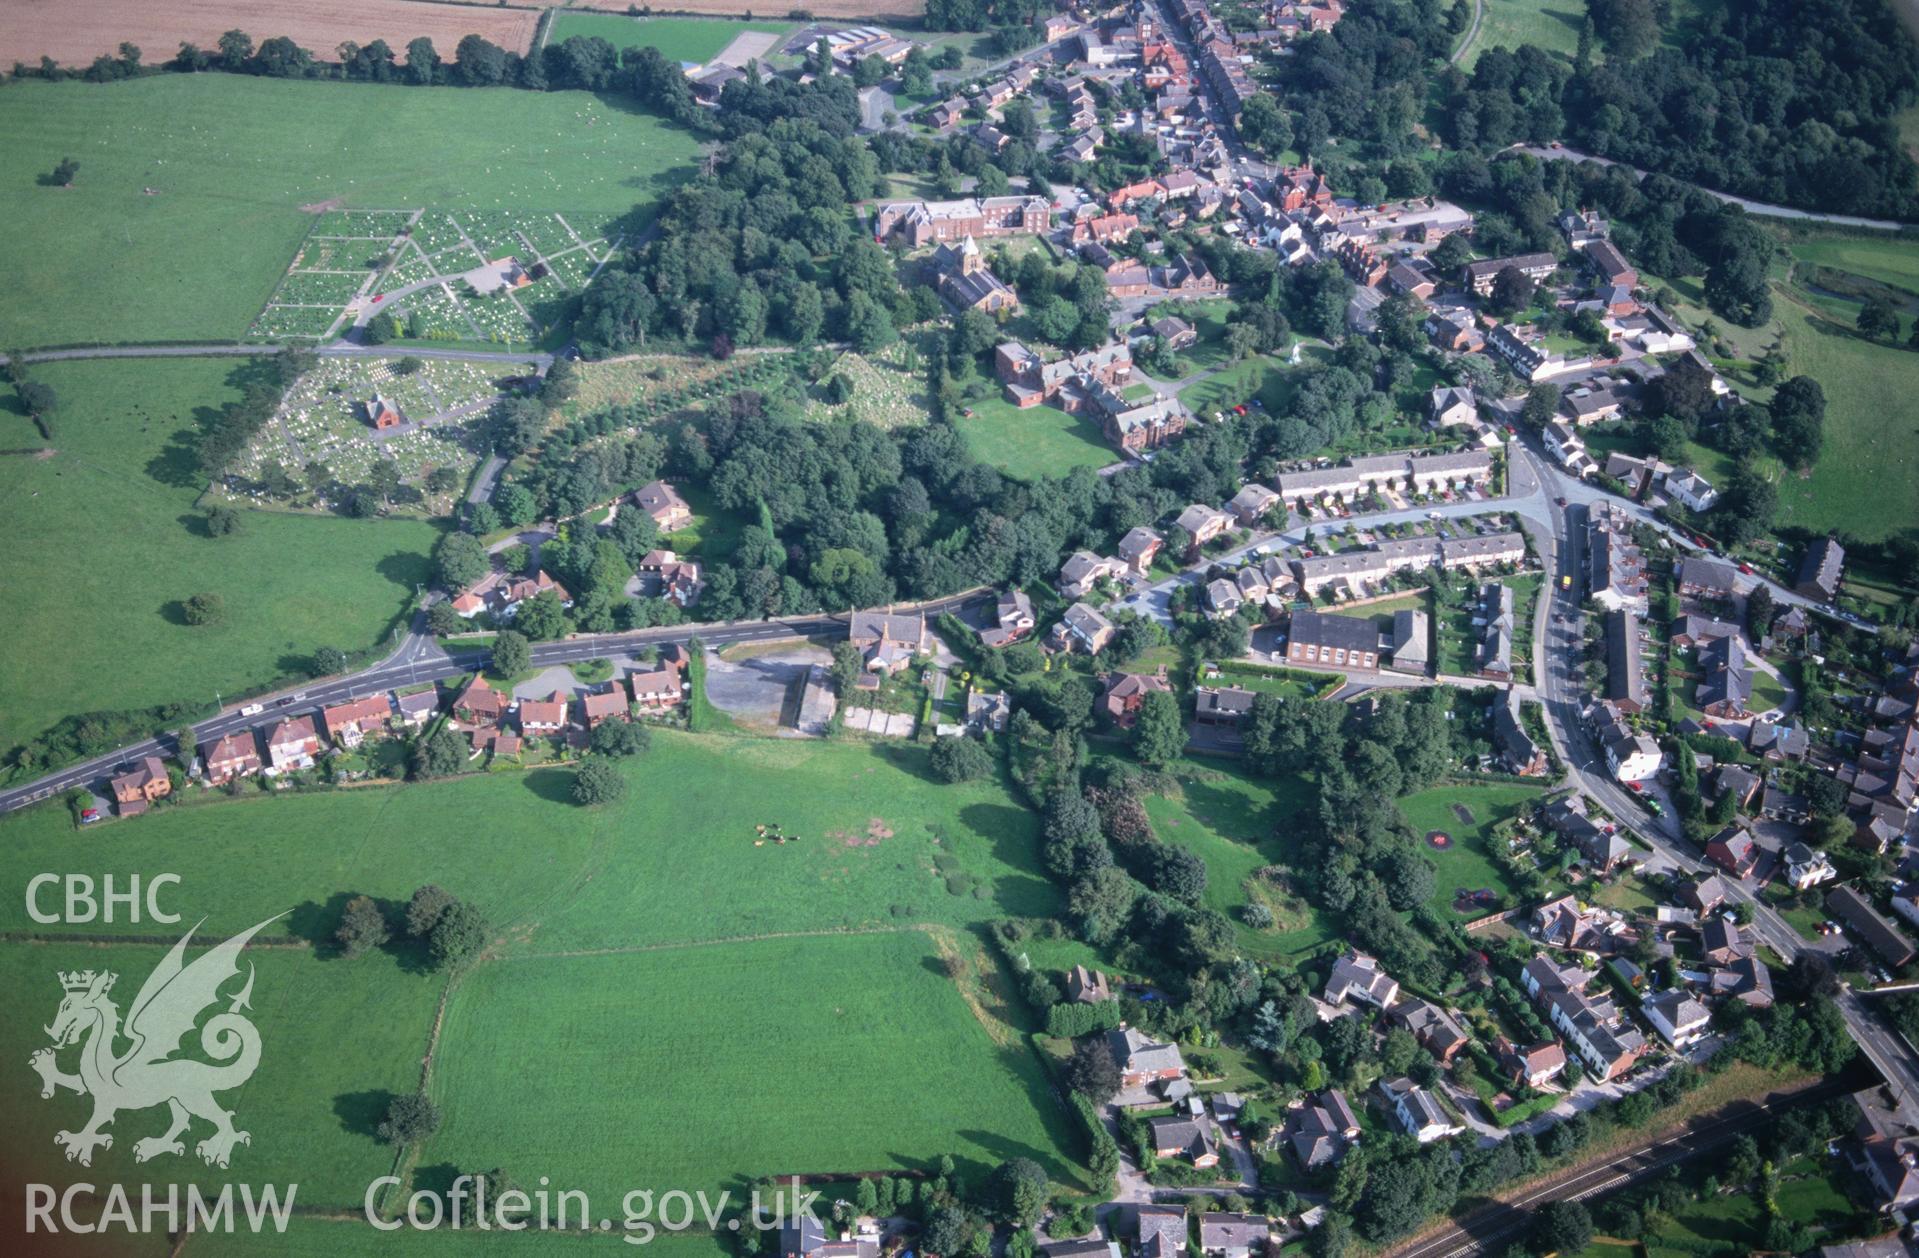 Slide of RCAHMW colour oblique aerial photograph of Hawarden, taken by T.G. Driver, 30/8/2000.